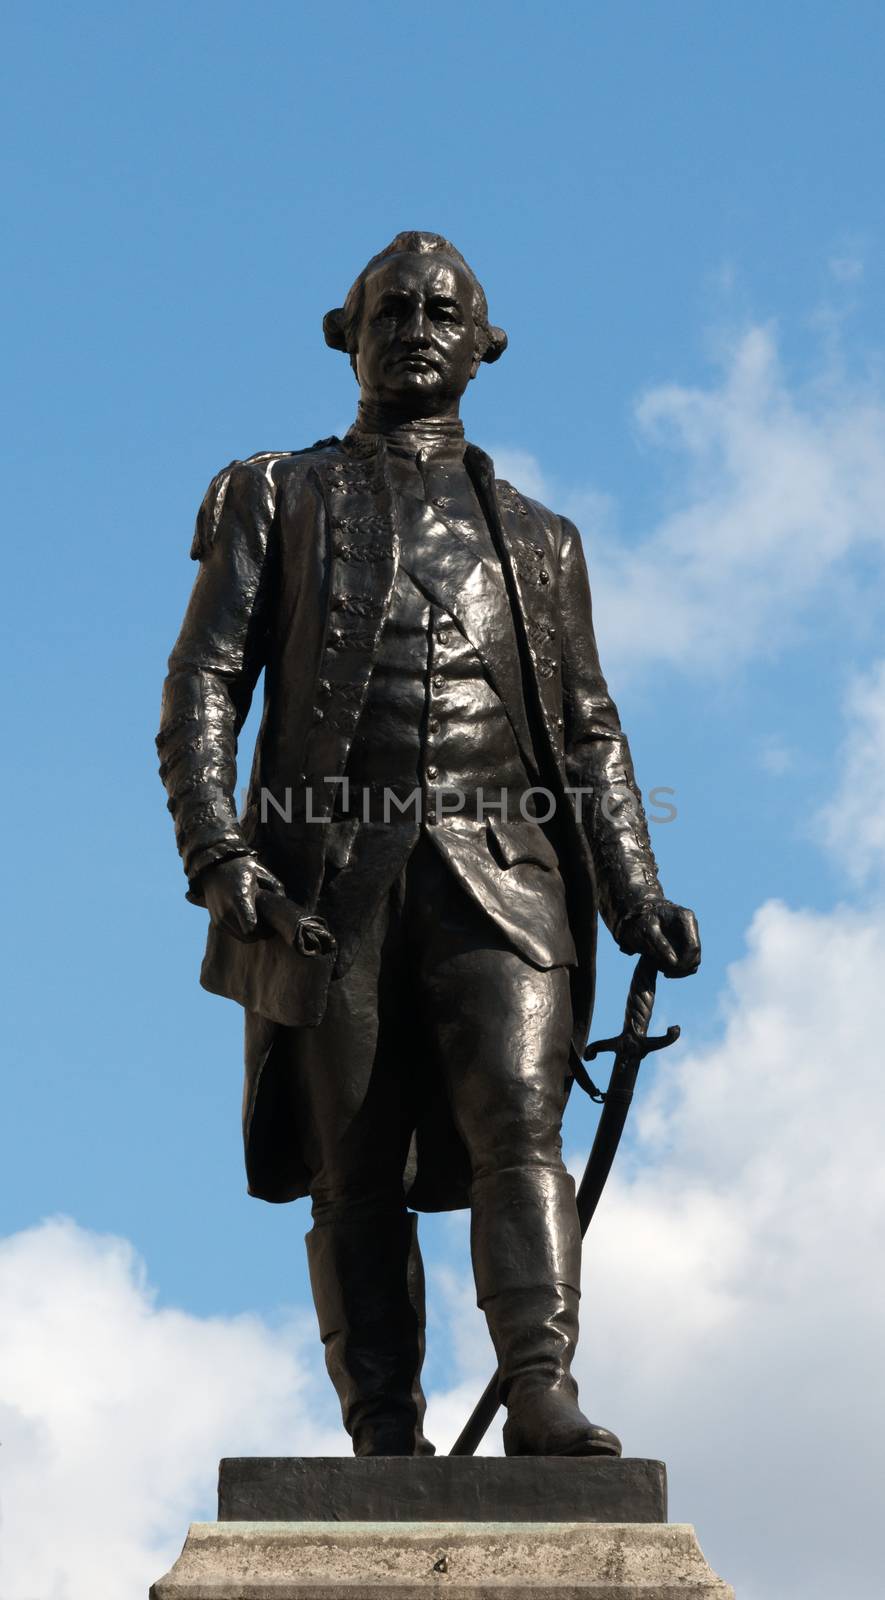 Clive of India Statue by TimAwe